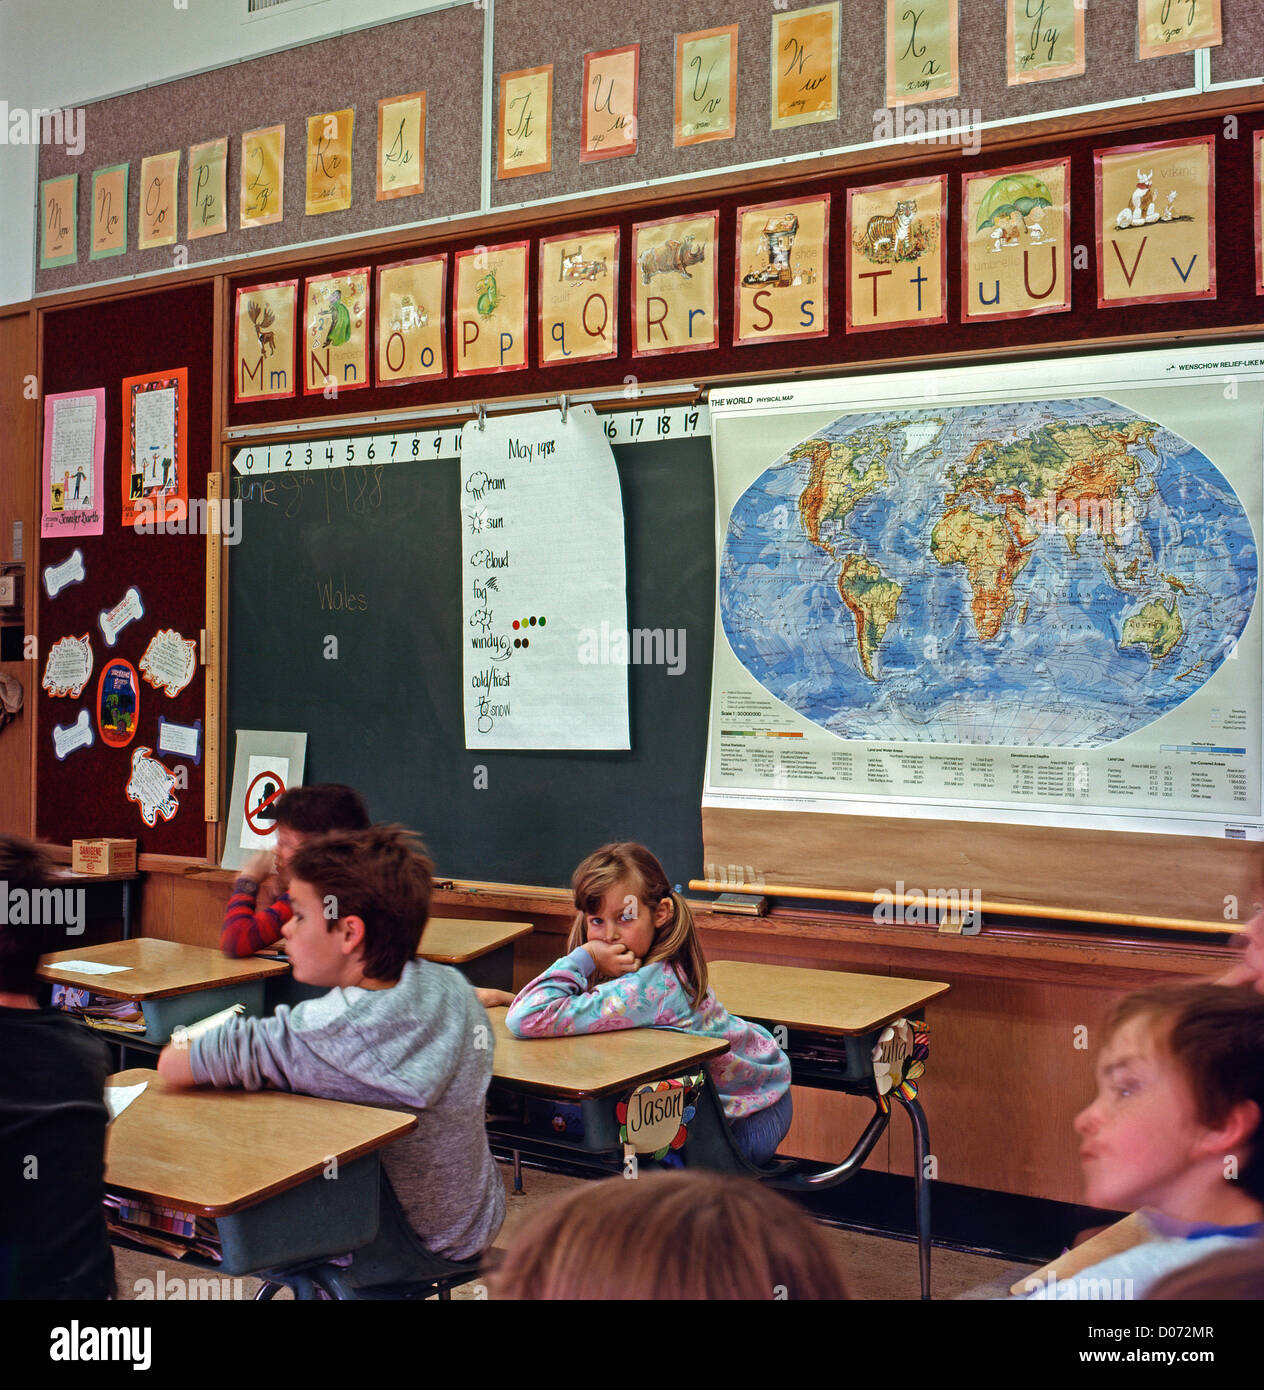 Elementary schoolchildren sitting at their desks in a 90s classroom with a map or the world Lantzville, British Columbia Canada   KATHY DEWITT Stock Photo